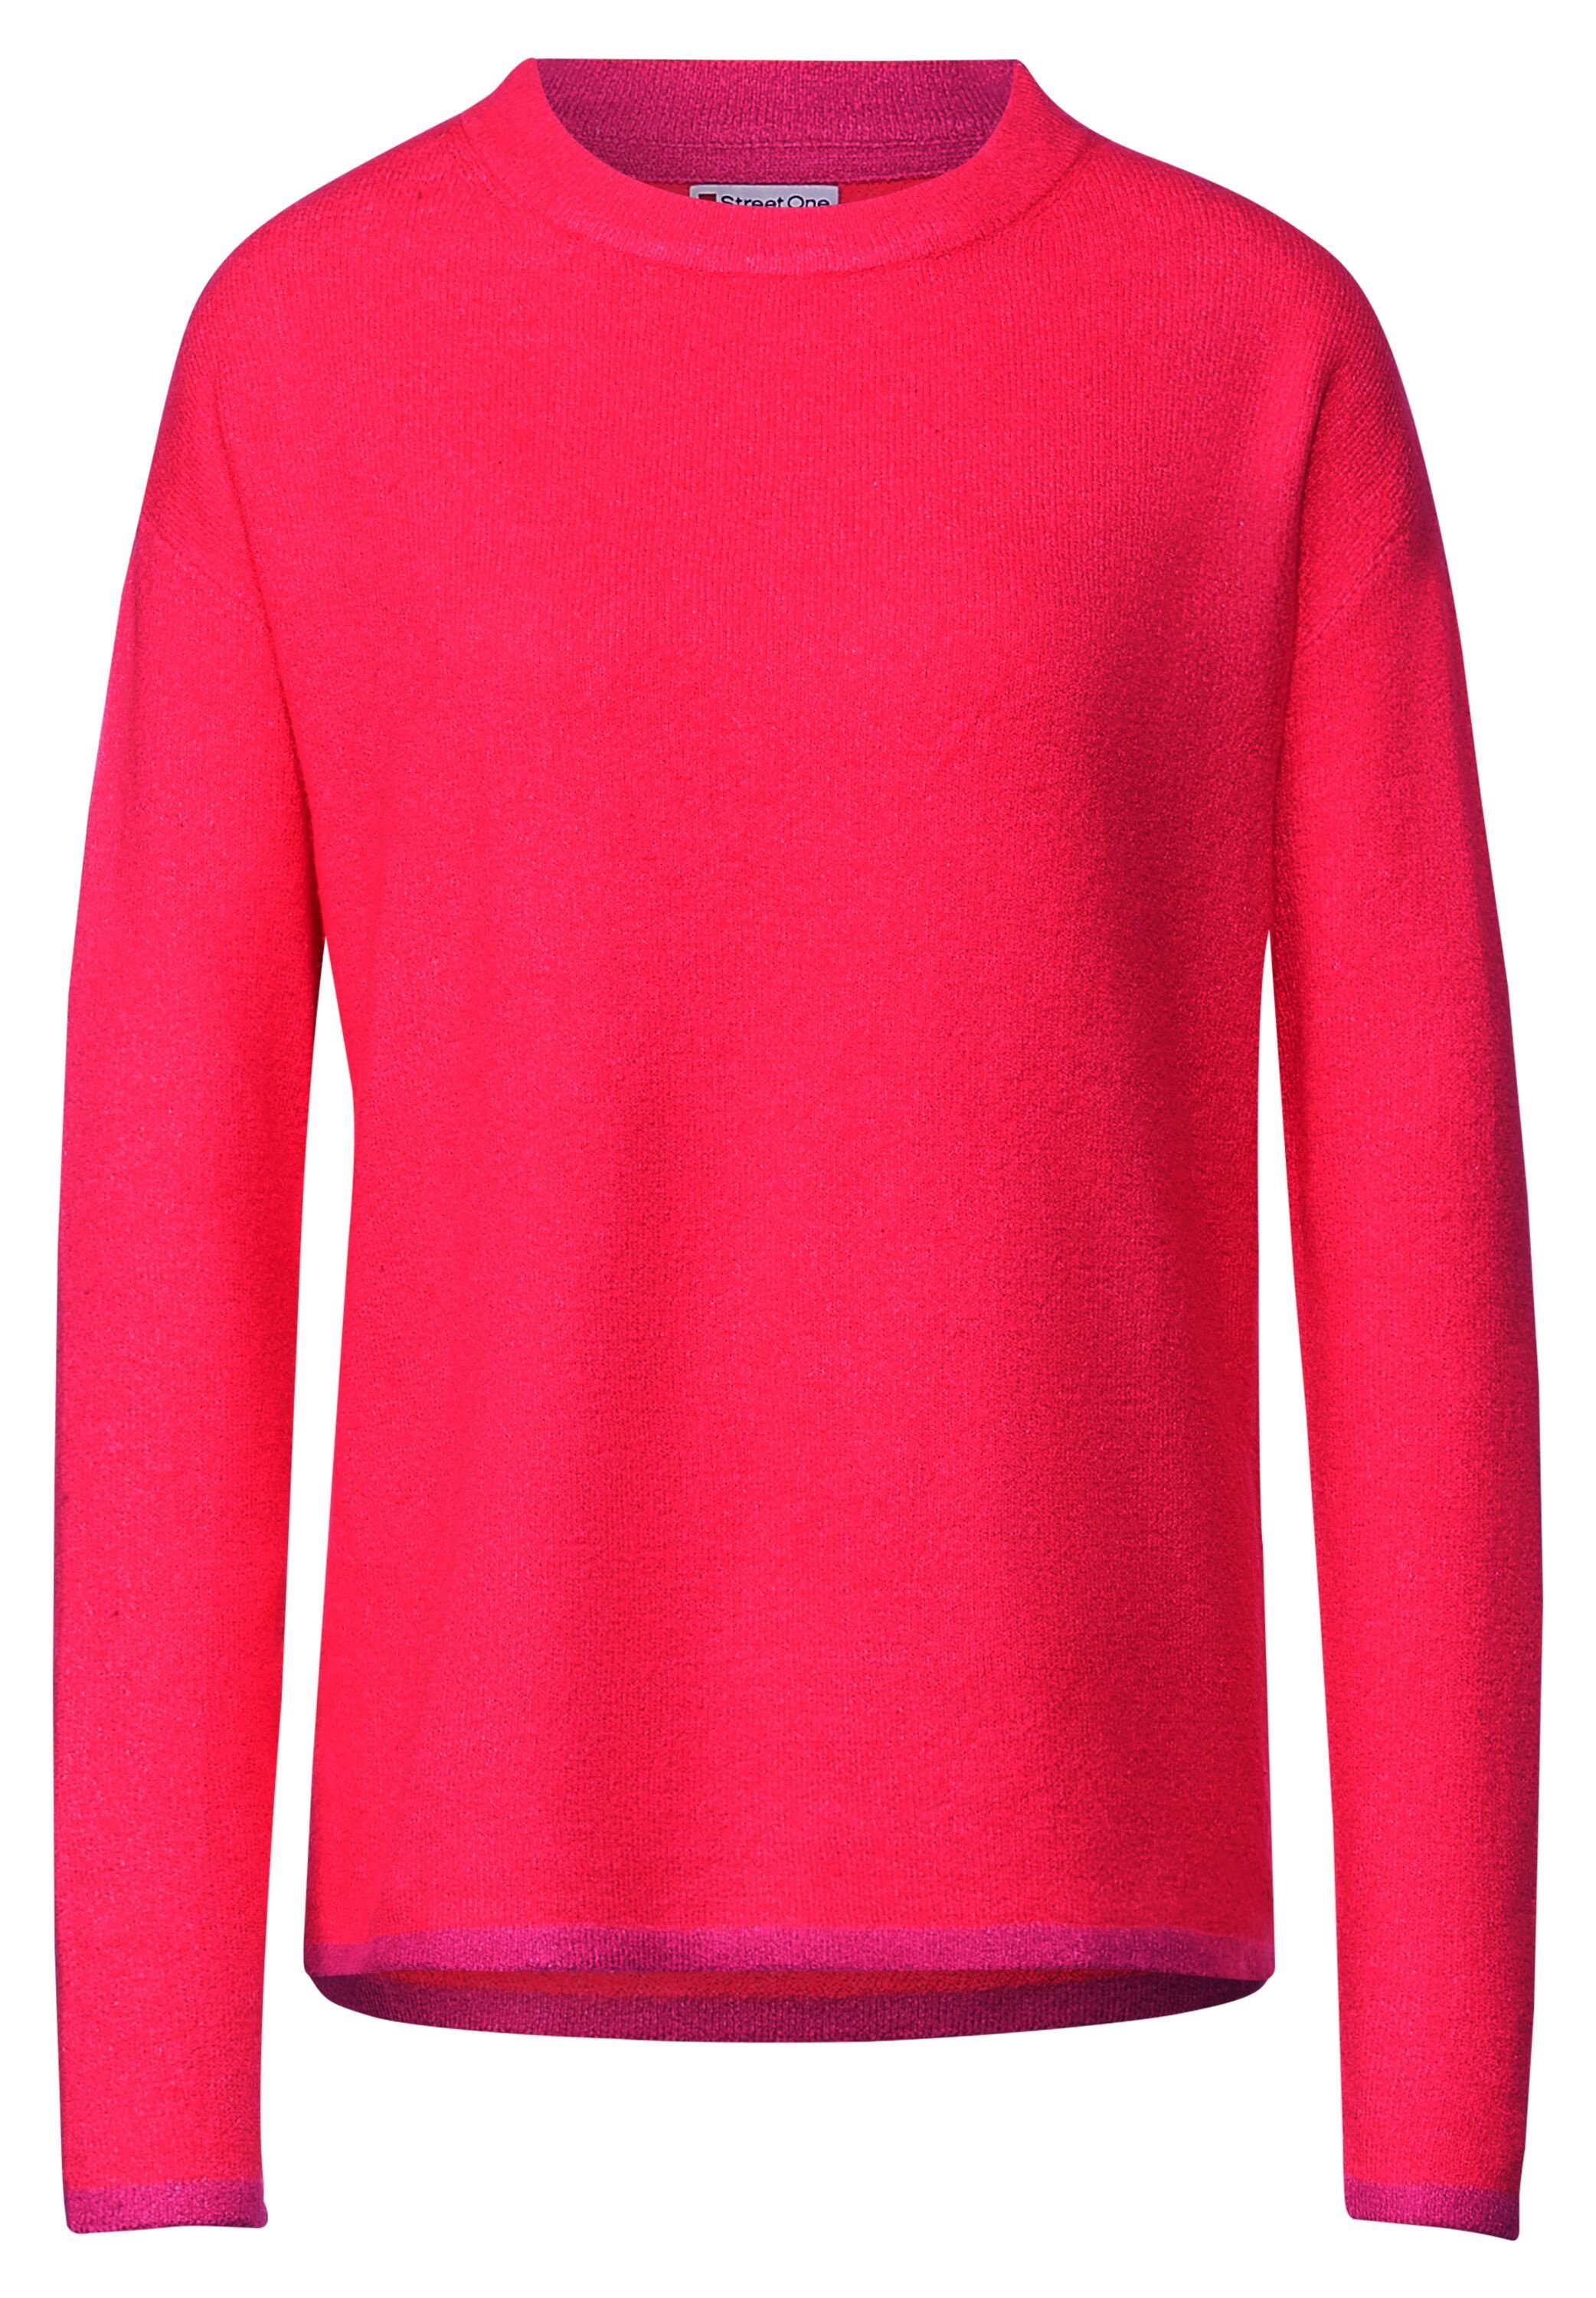 STREET ONE Strickpullover Pullover mit Farbdetails showy coral